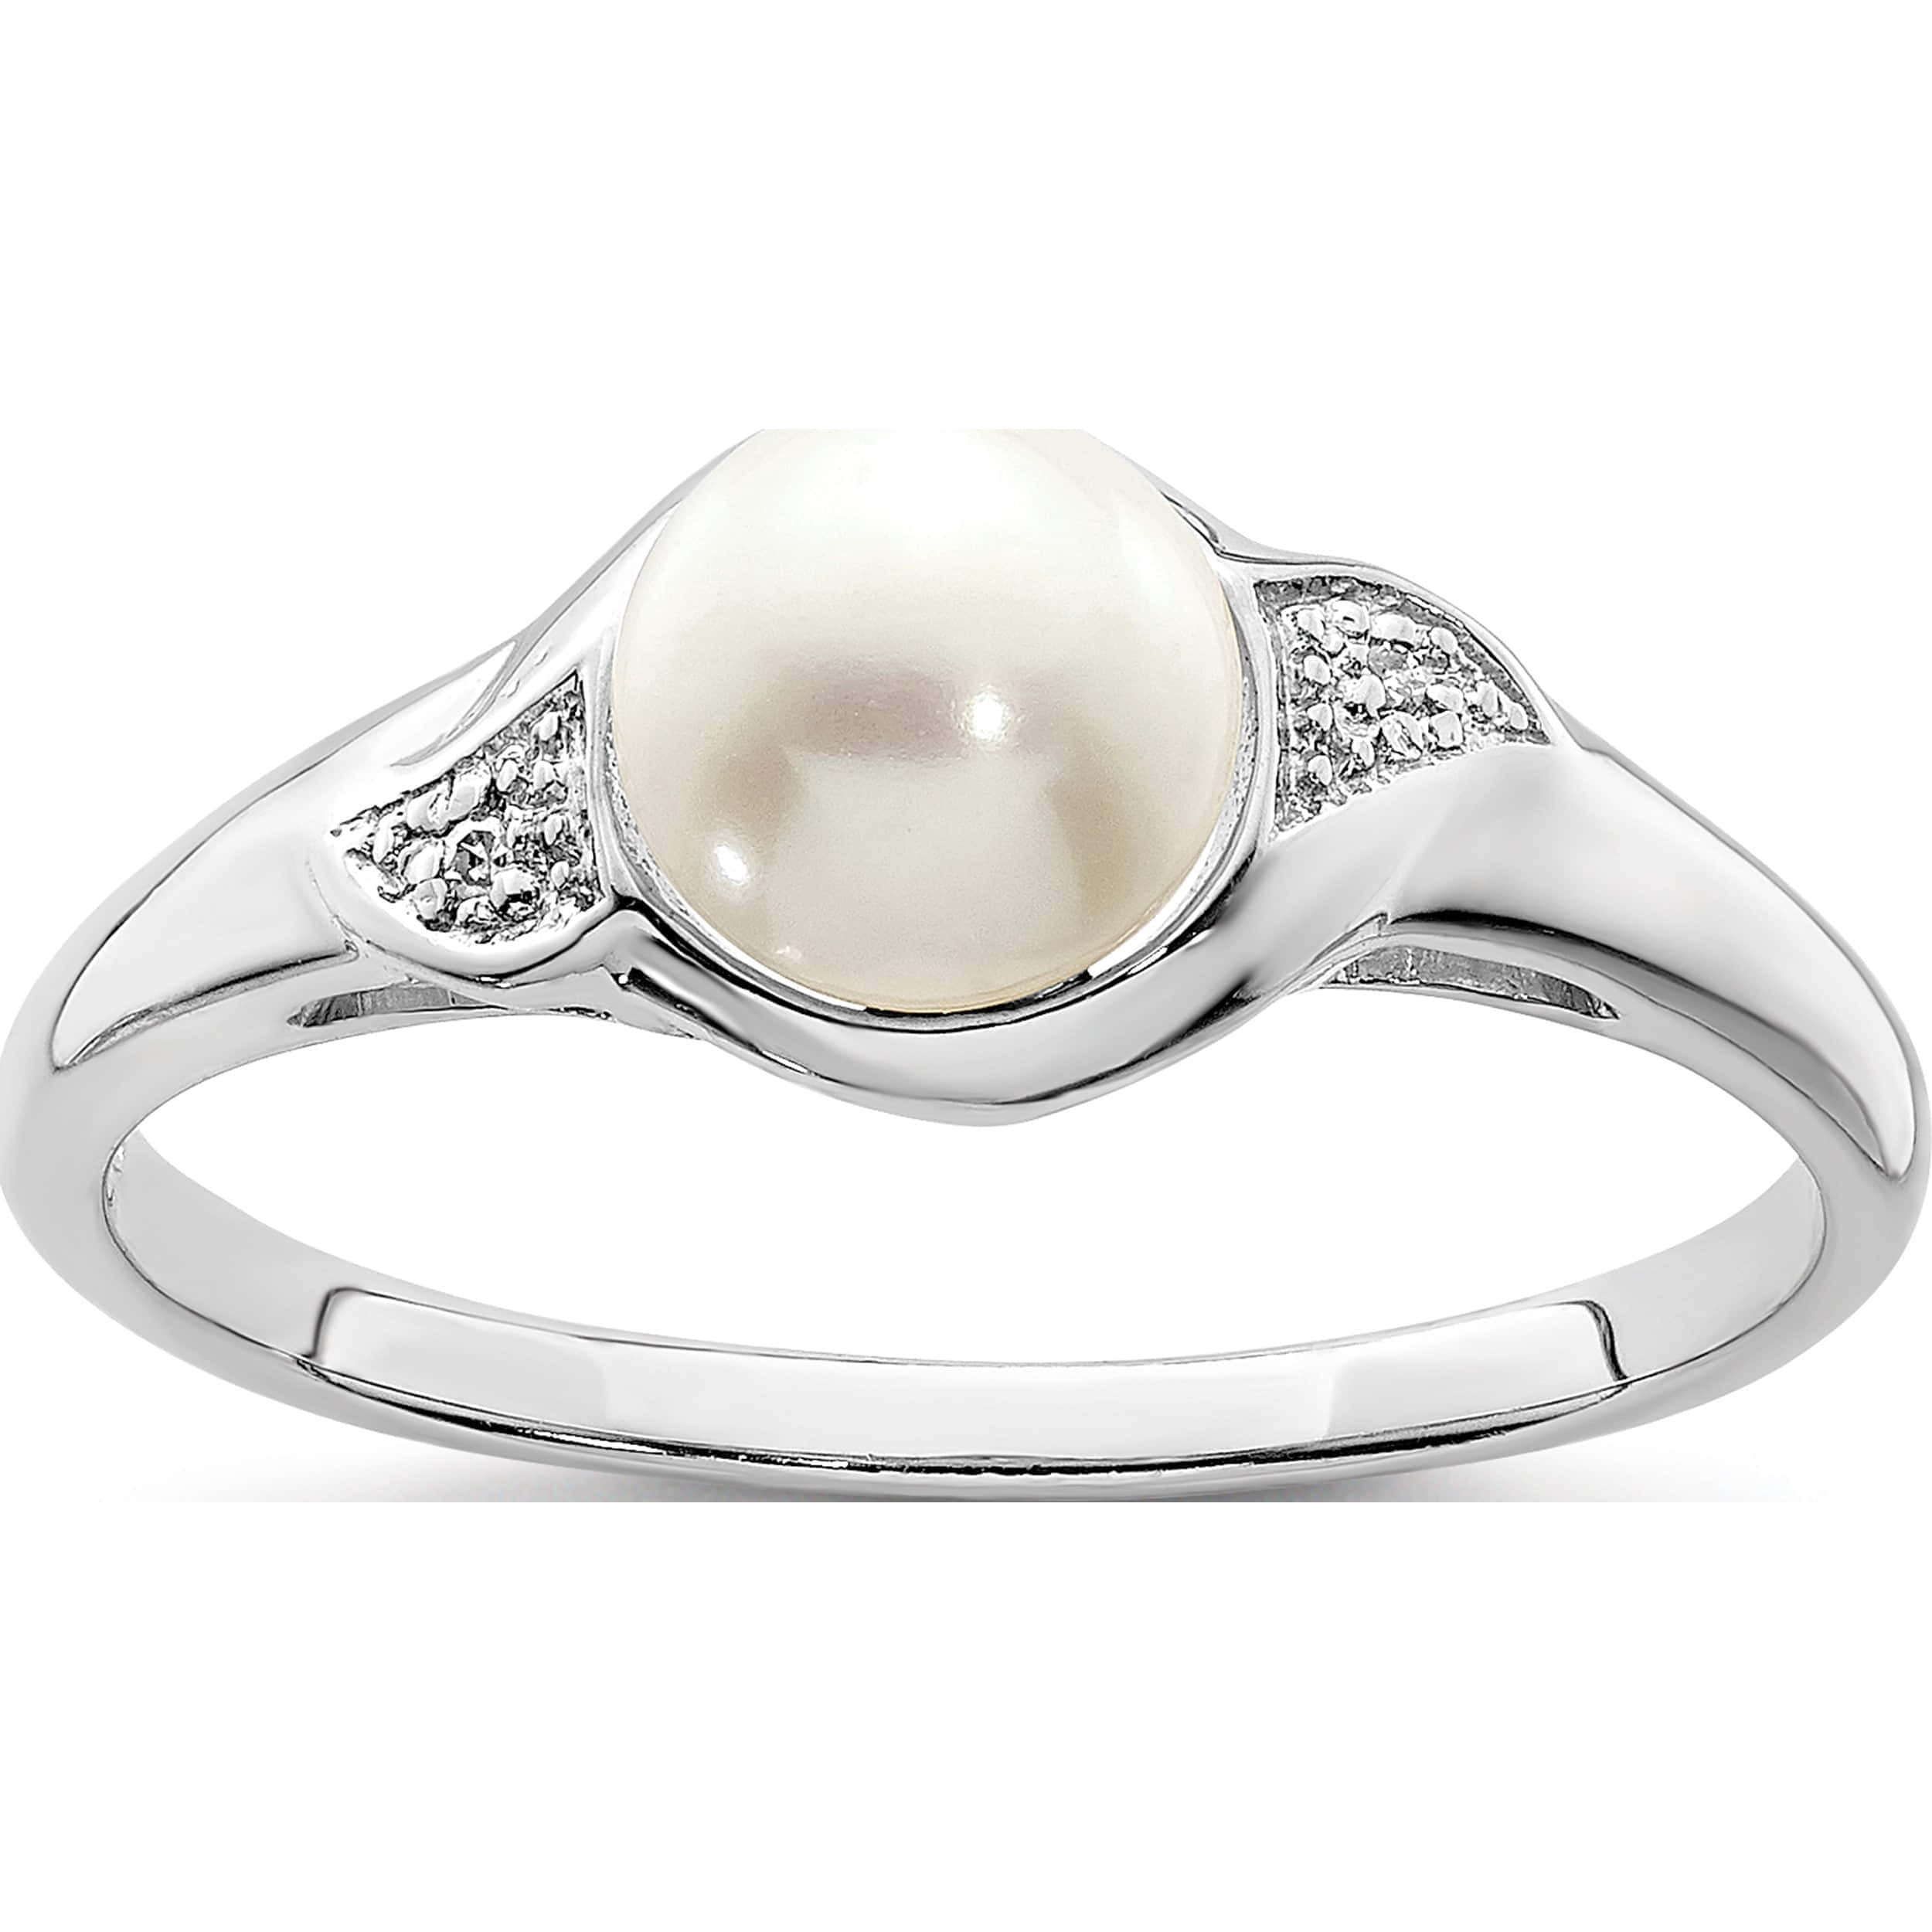 Oversized Diamante Simulated Pearl Daisy Cocktail Ring Silver Tone Metal